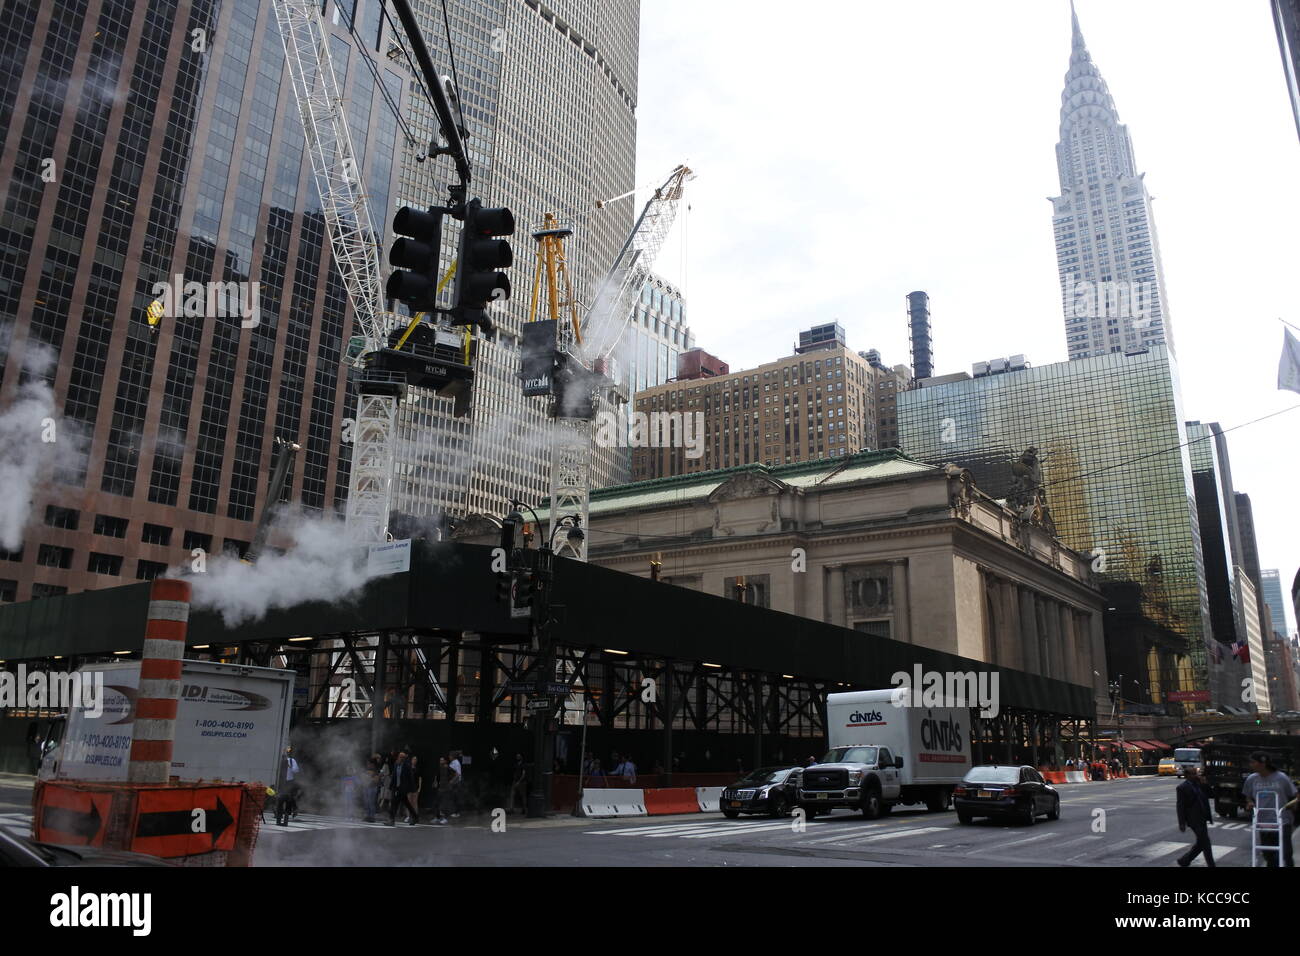 Construction of One Vanderbilt, by Grand Central Terminal, Mew York Stock Photo